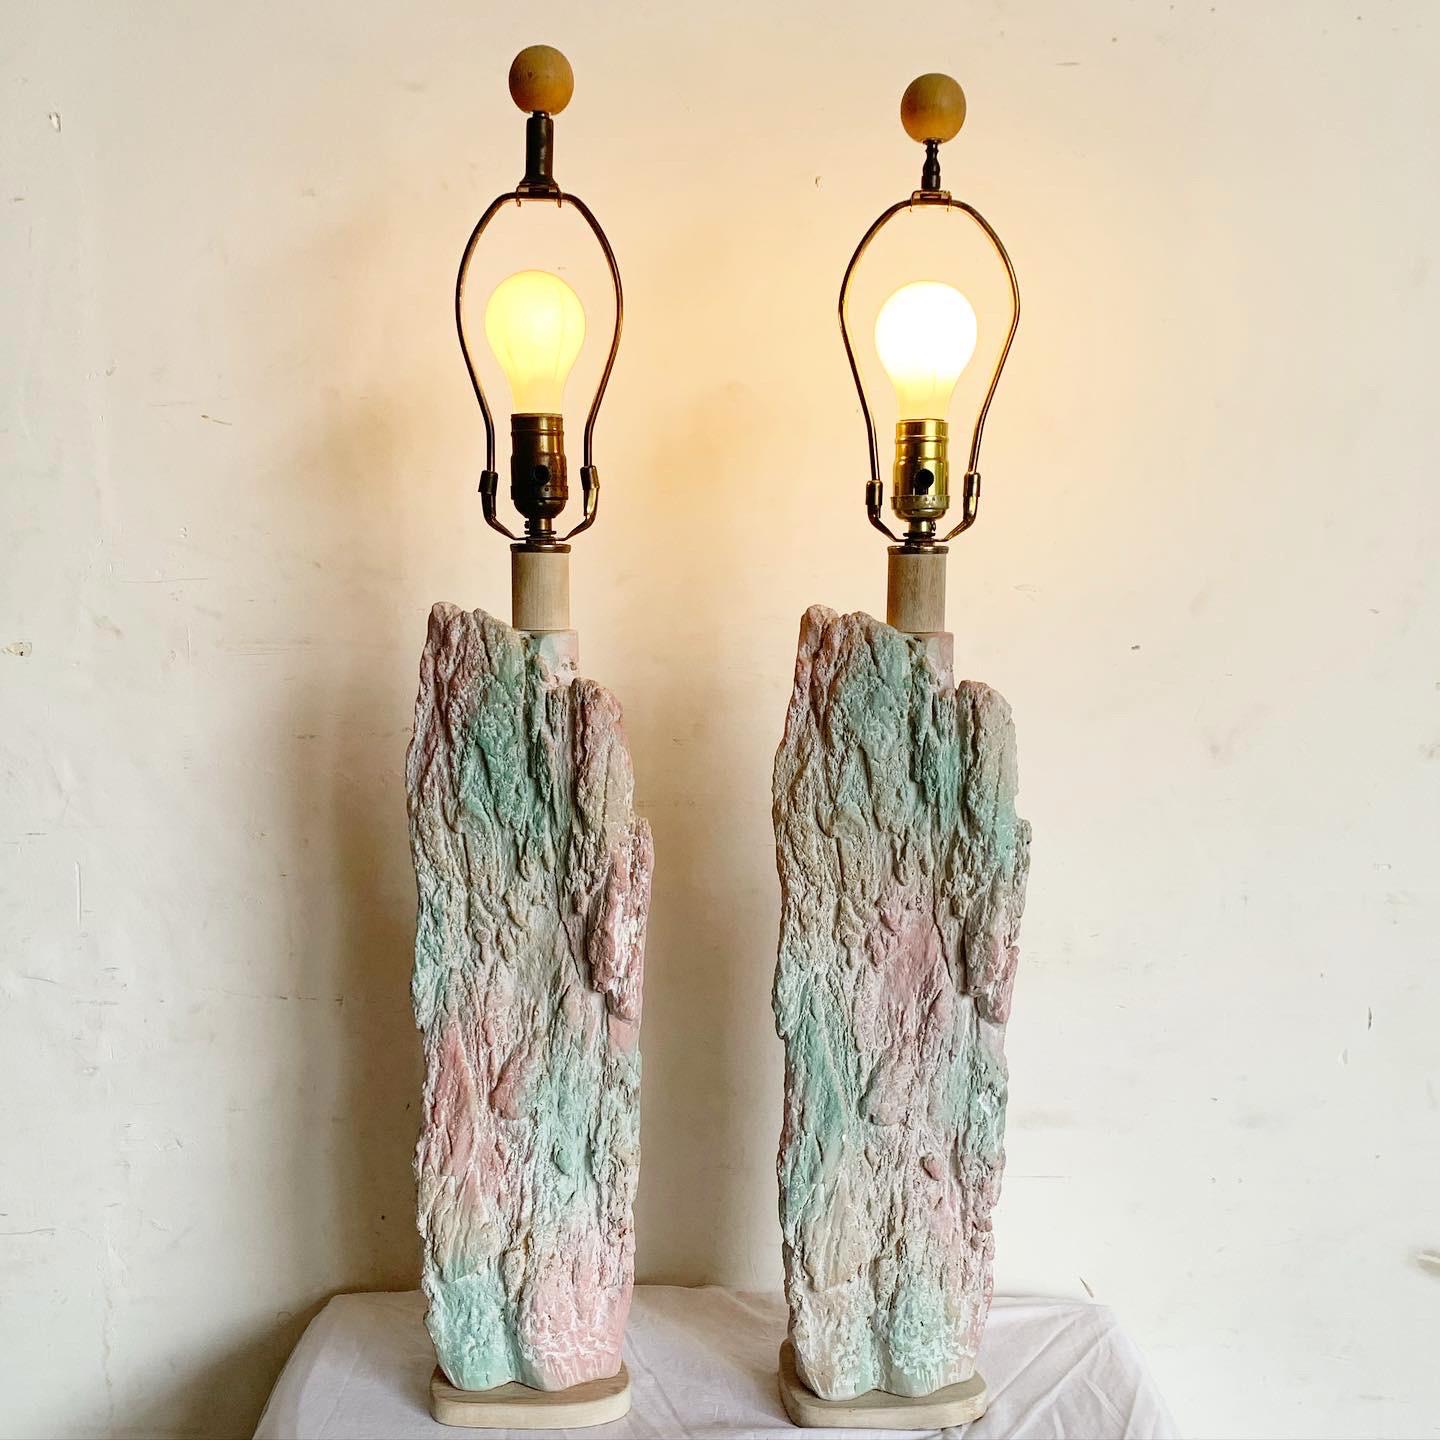 Step back into the 1980s with the Postmodern Brutalist Pink and Green Faux Stone Three Way Table Lamps. This pair captures the vibrant artistry of the era with a hand-painted scene of a lone wolf against a moonlit mountain backdrop. Standing at